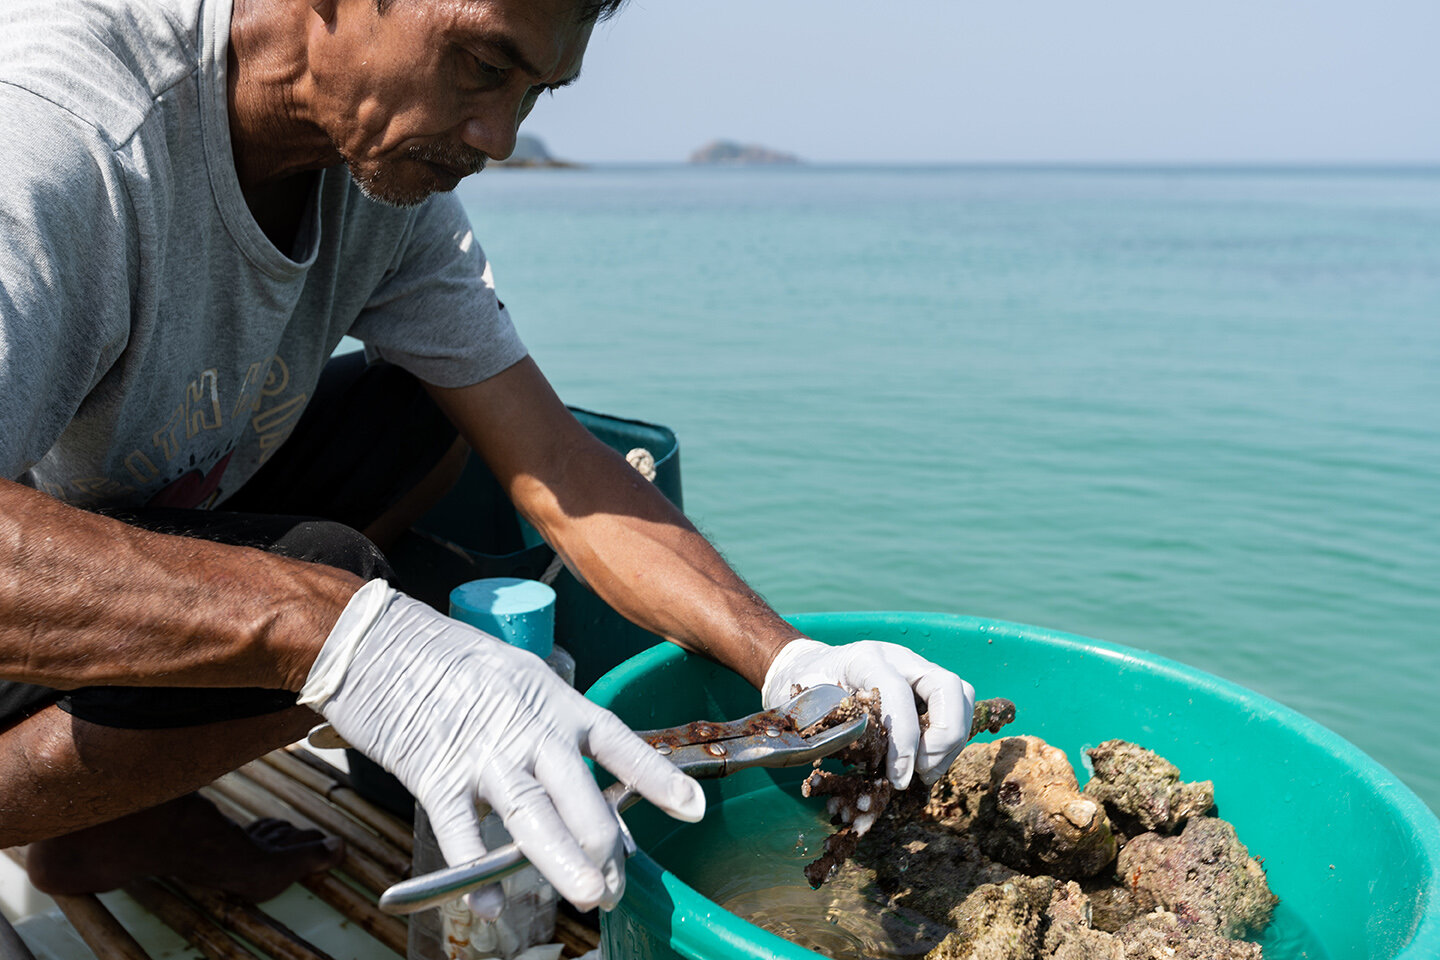  Feb 02, 2020 - Kyun Pila, Myanmar. Anuar Abdullah cuts a piece of coral during the coral propagation process. © Nicolas Axelrod / Ruom 